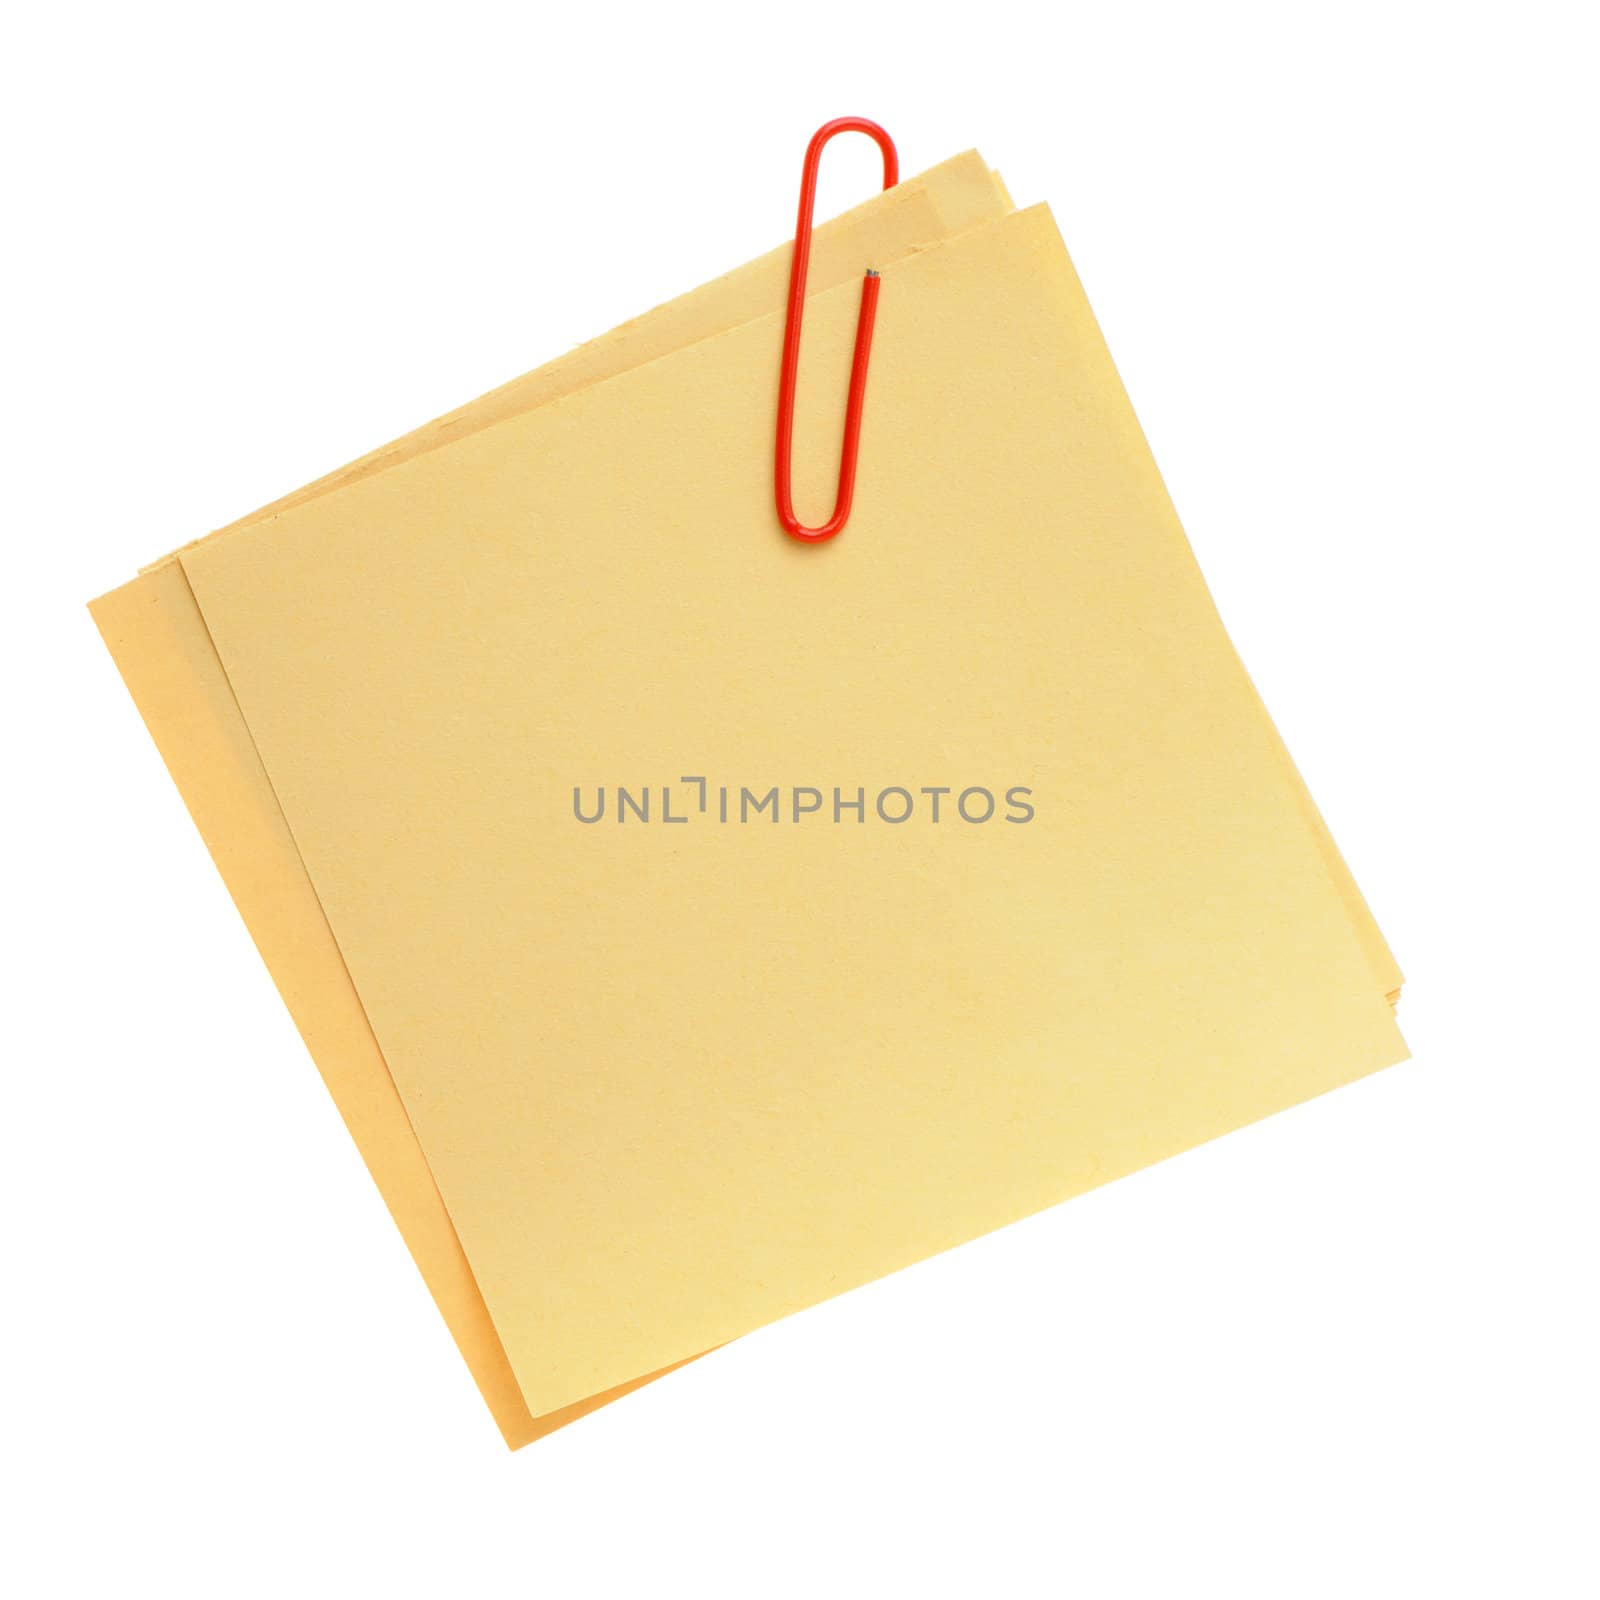 Paper note. It is attached red pin on a white background